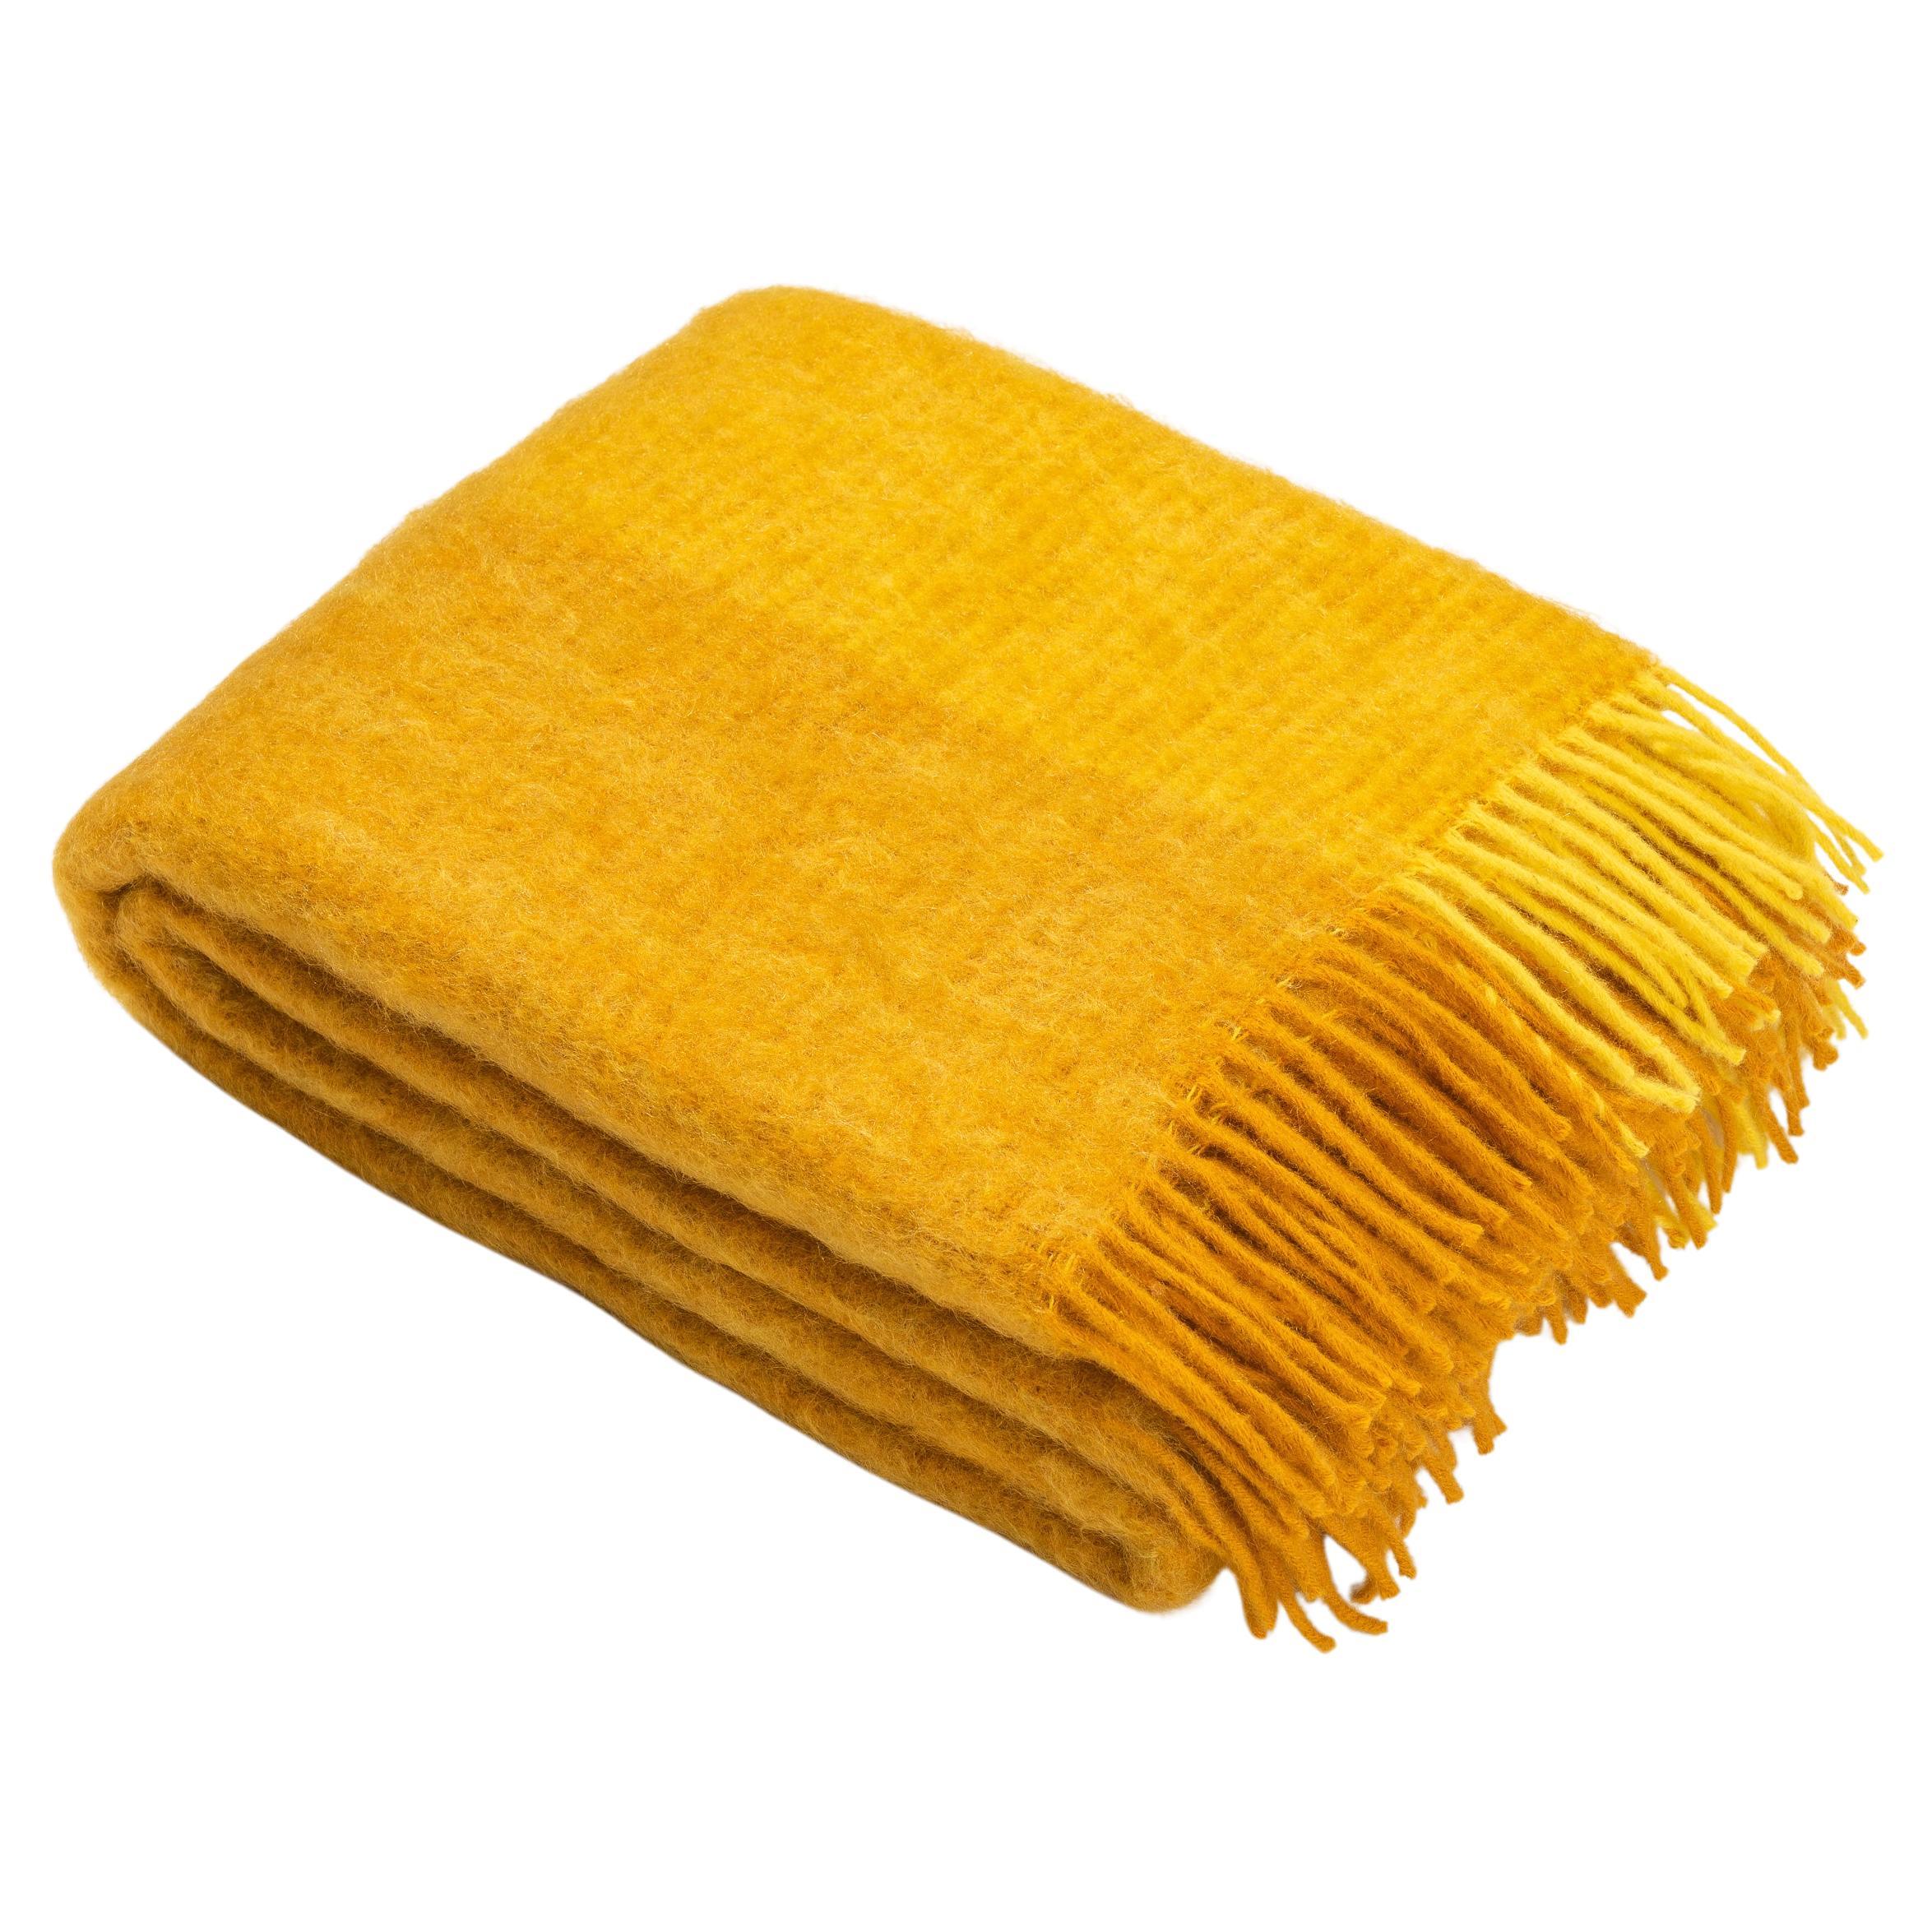 Mohair Blanket Yellow Woven of Mohair and Wool by Catharina Mende For Sale